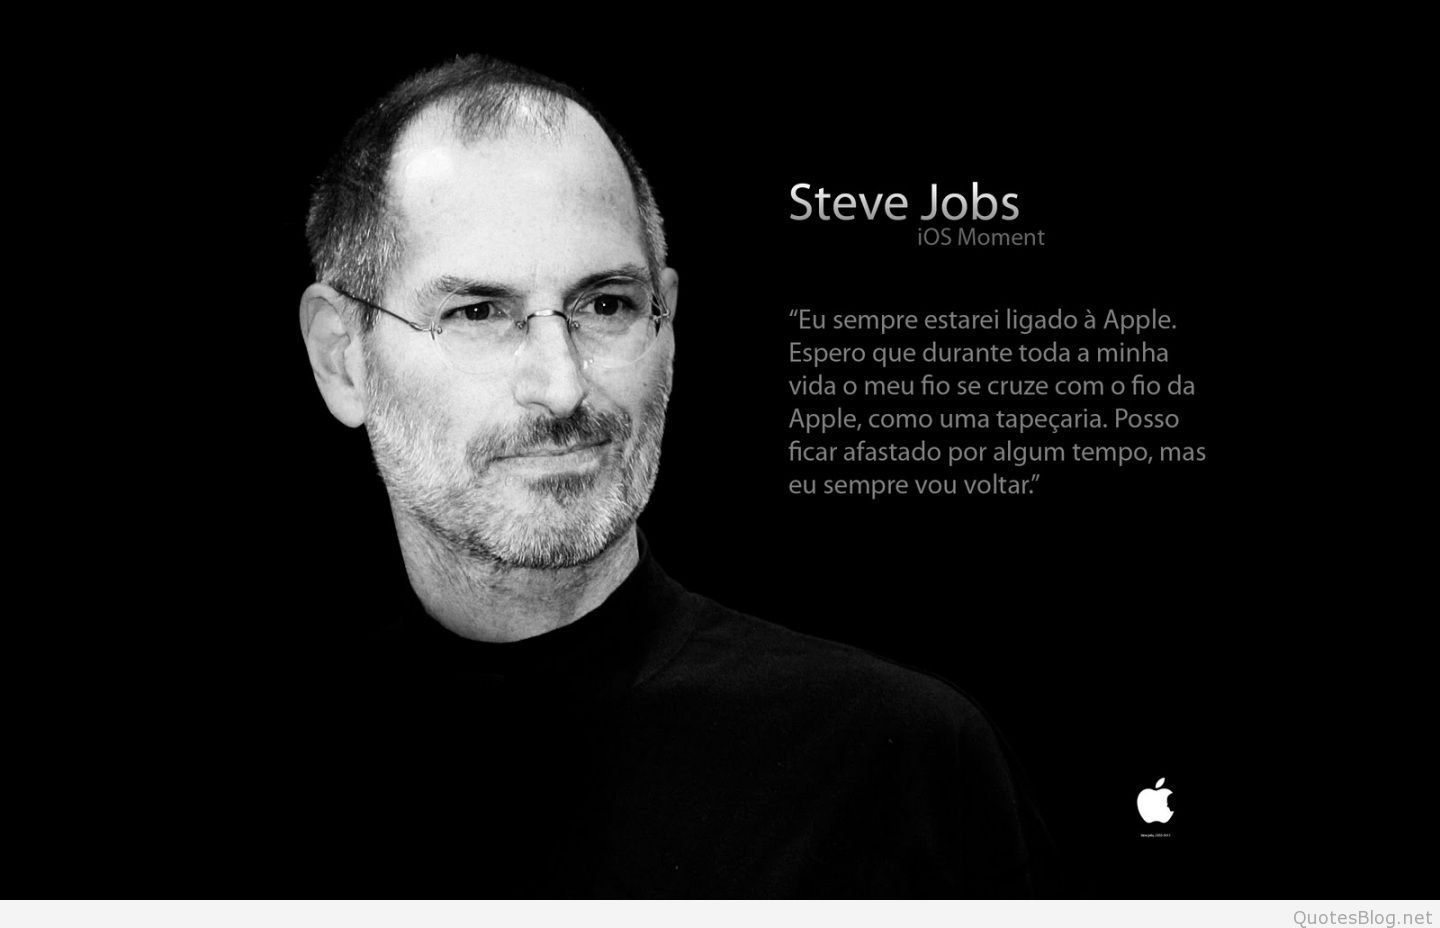 Steve Jobs Wallpaper Quotes and Sayings